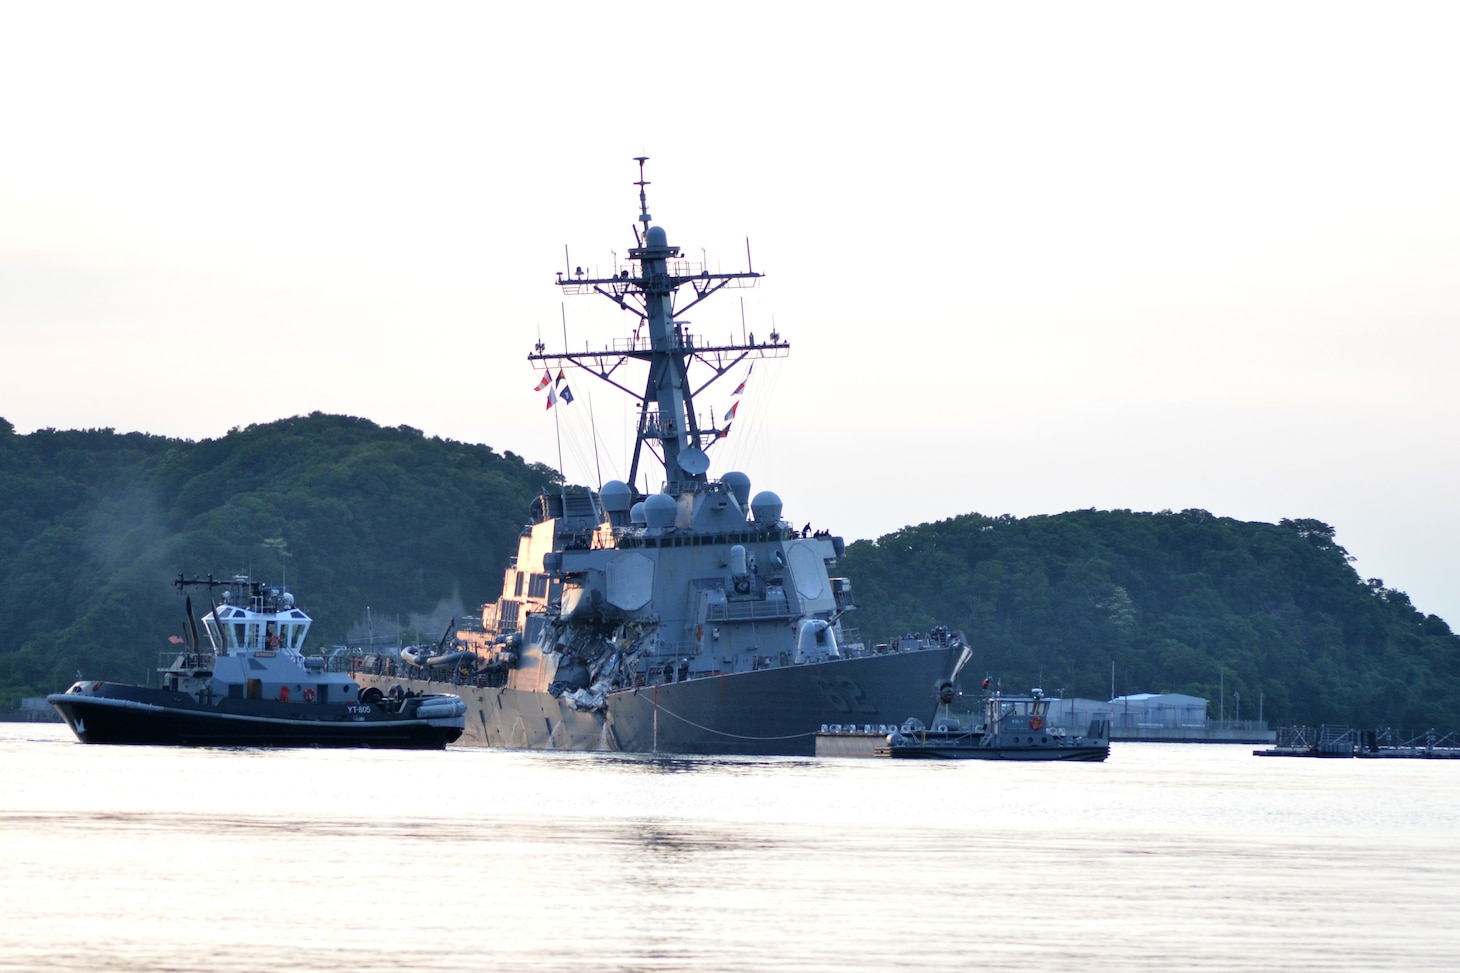 The U.S. Navy Arleigh Burke-class guided-missile destroyer USS Fitzgerald (DDG 62) returns to Fleet Activities Yokosuka following a collision with a merchant vessel while operating southwest of Yokosuka, Japan, June 17, 2017. 